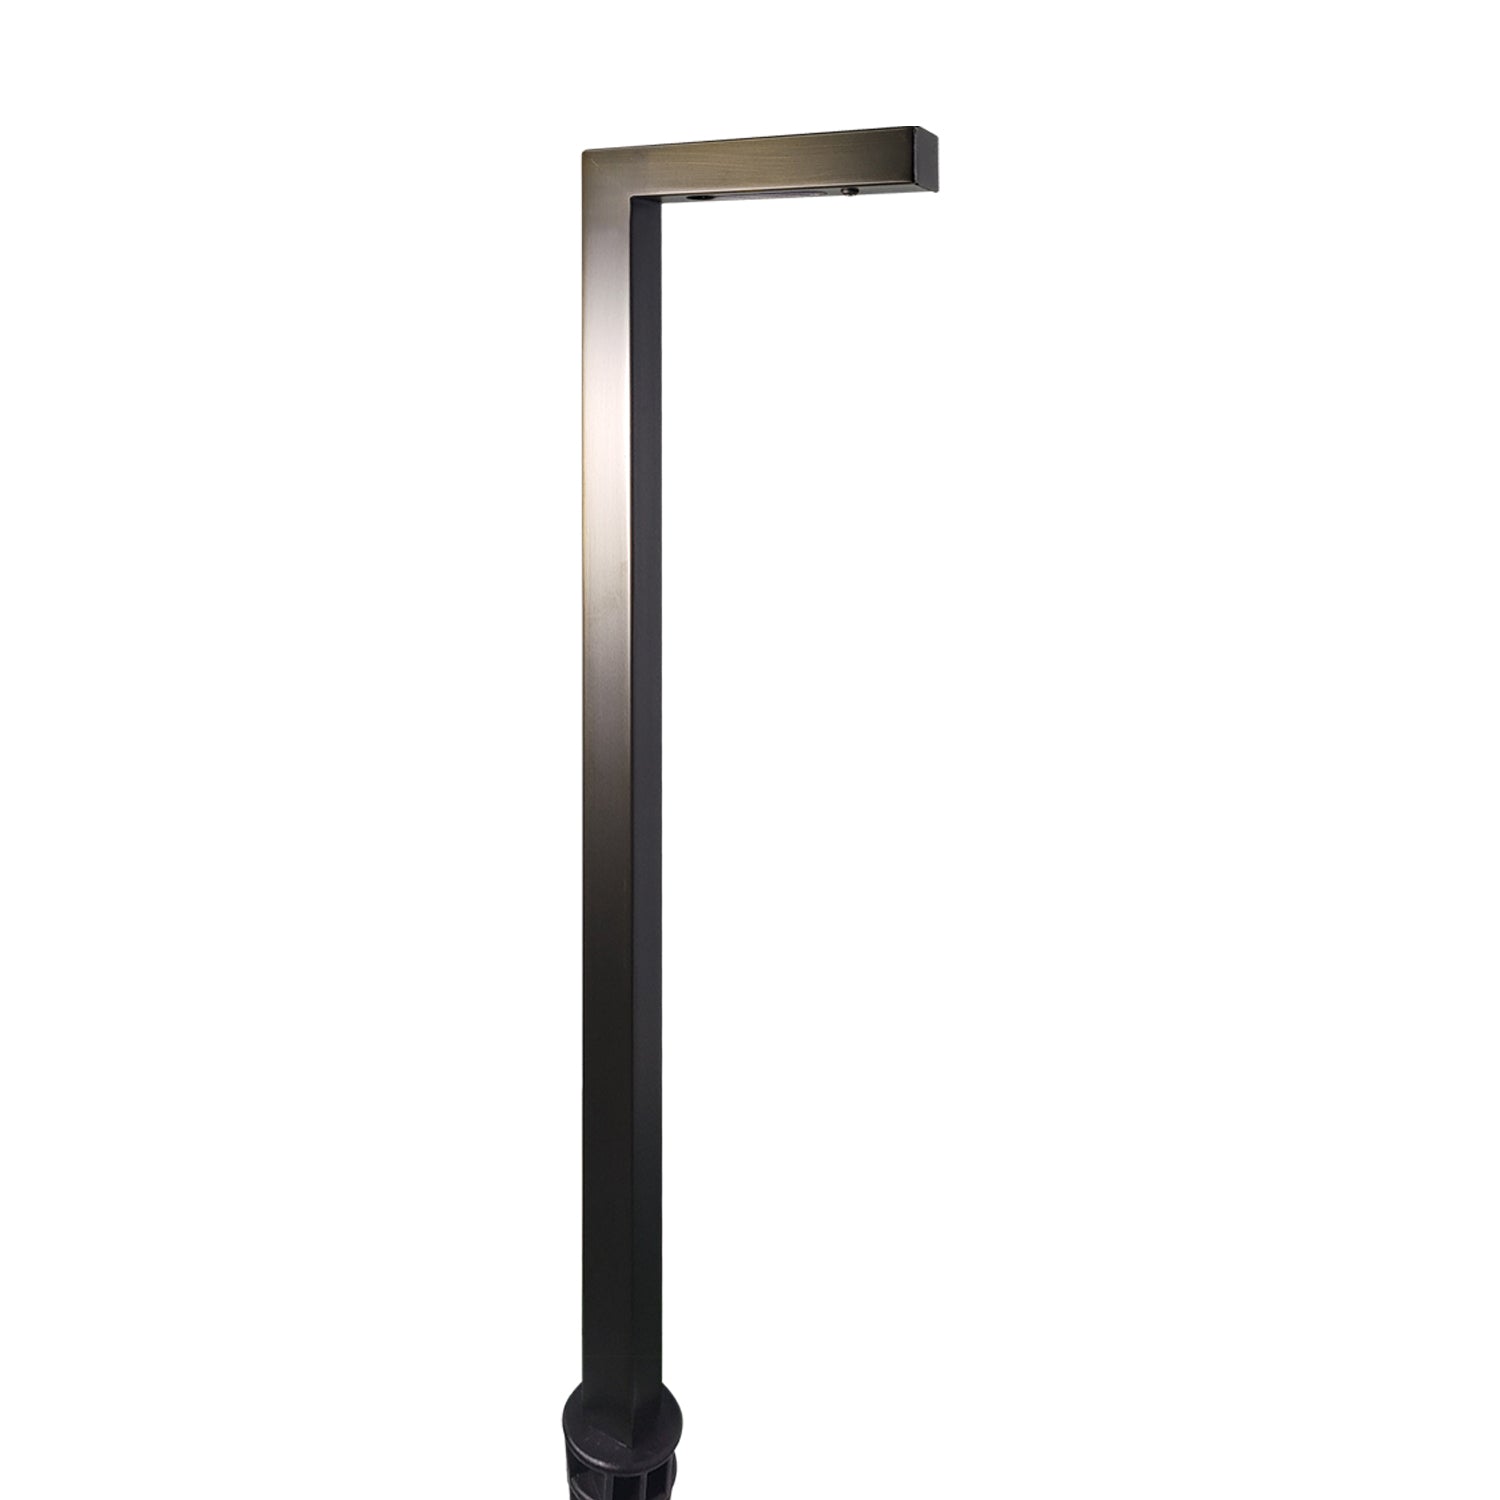 Solid brass low voltage outdoor pathway light in sleek design, ideal for durable and waterproof landscape lighting